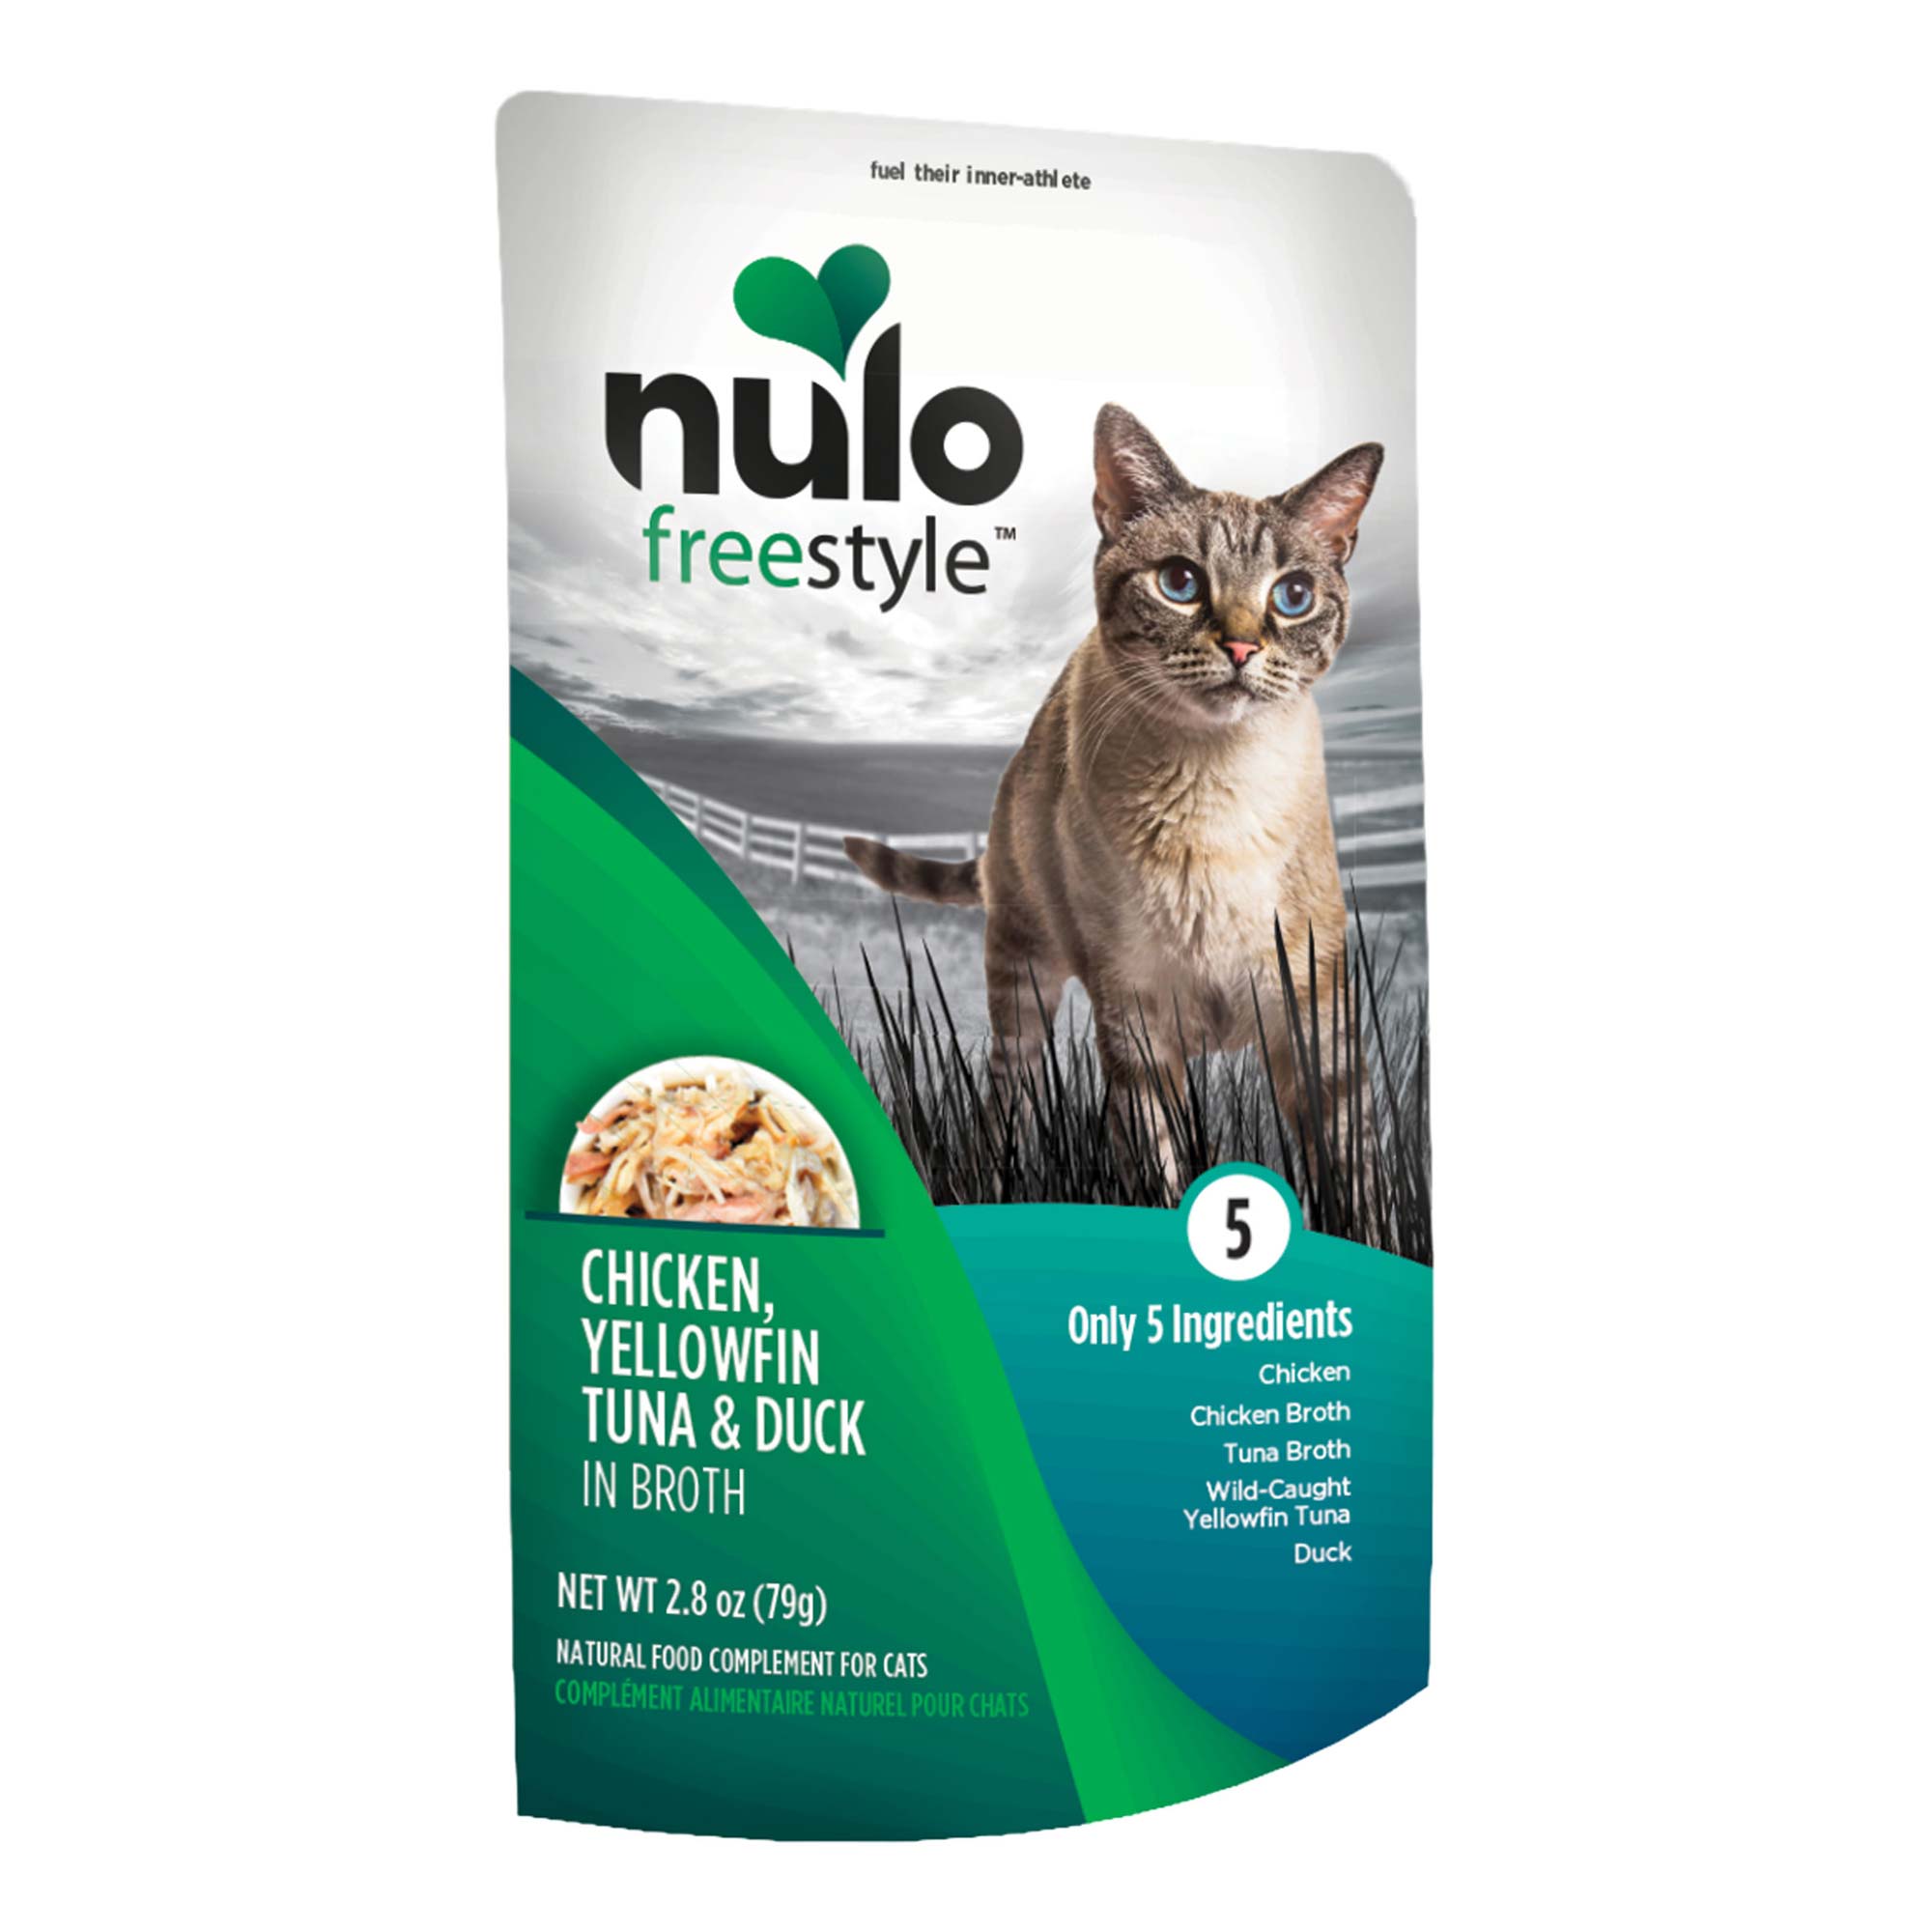 Nulo FreeStyle Cat Chicken, Yellowfin Tuna, & Duck in Broth Wet Cat Food, 2.8 Ounces